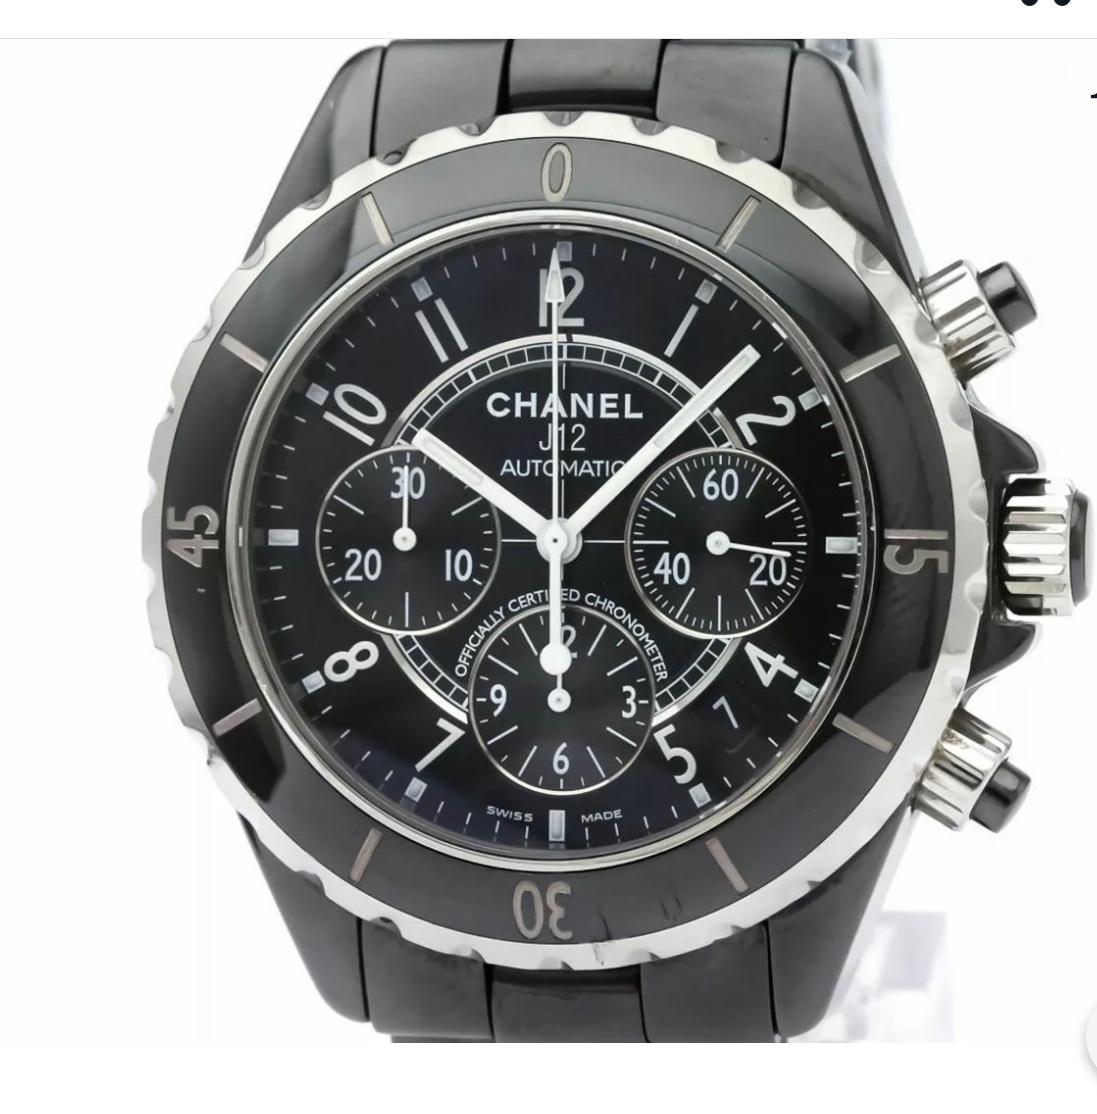 Chanel, Paris, J12 Automatic Chronograph 200M. Made circa 2010. Fine, curved, self-winding, water resistant to 200 m, stainless steel and ceramic Chronometer wristwatch with round button chronograph, resisters, date and a black ceramic Chanel link